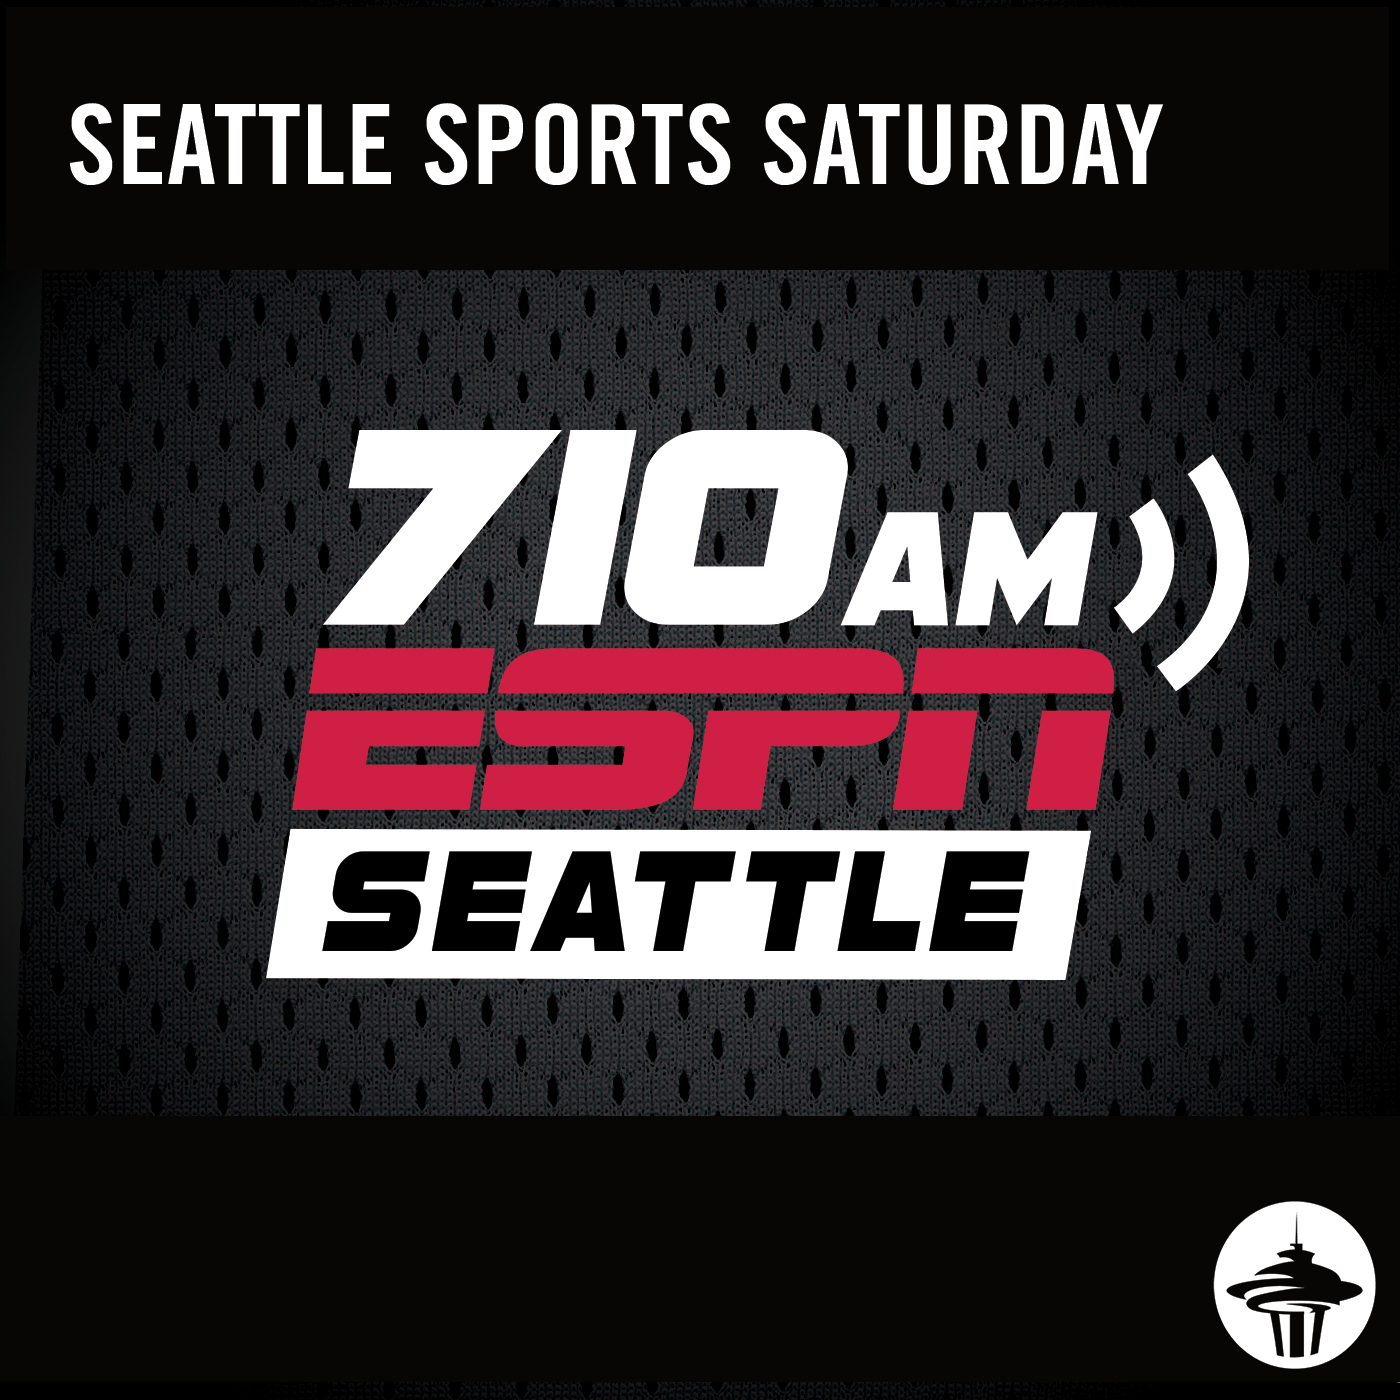 Seattle Sports Saturday: Russell Wilson vs the Seahawks